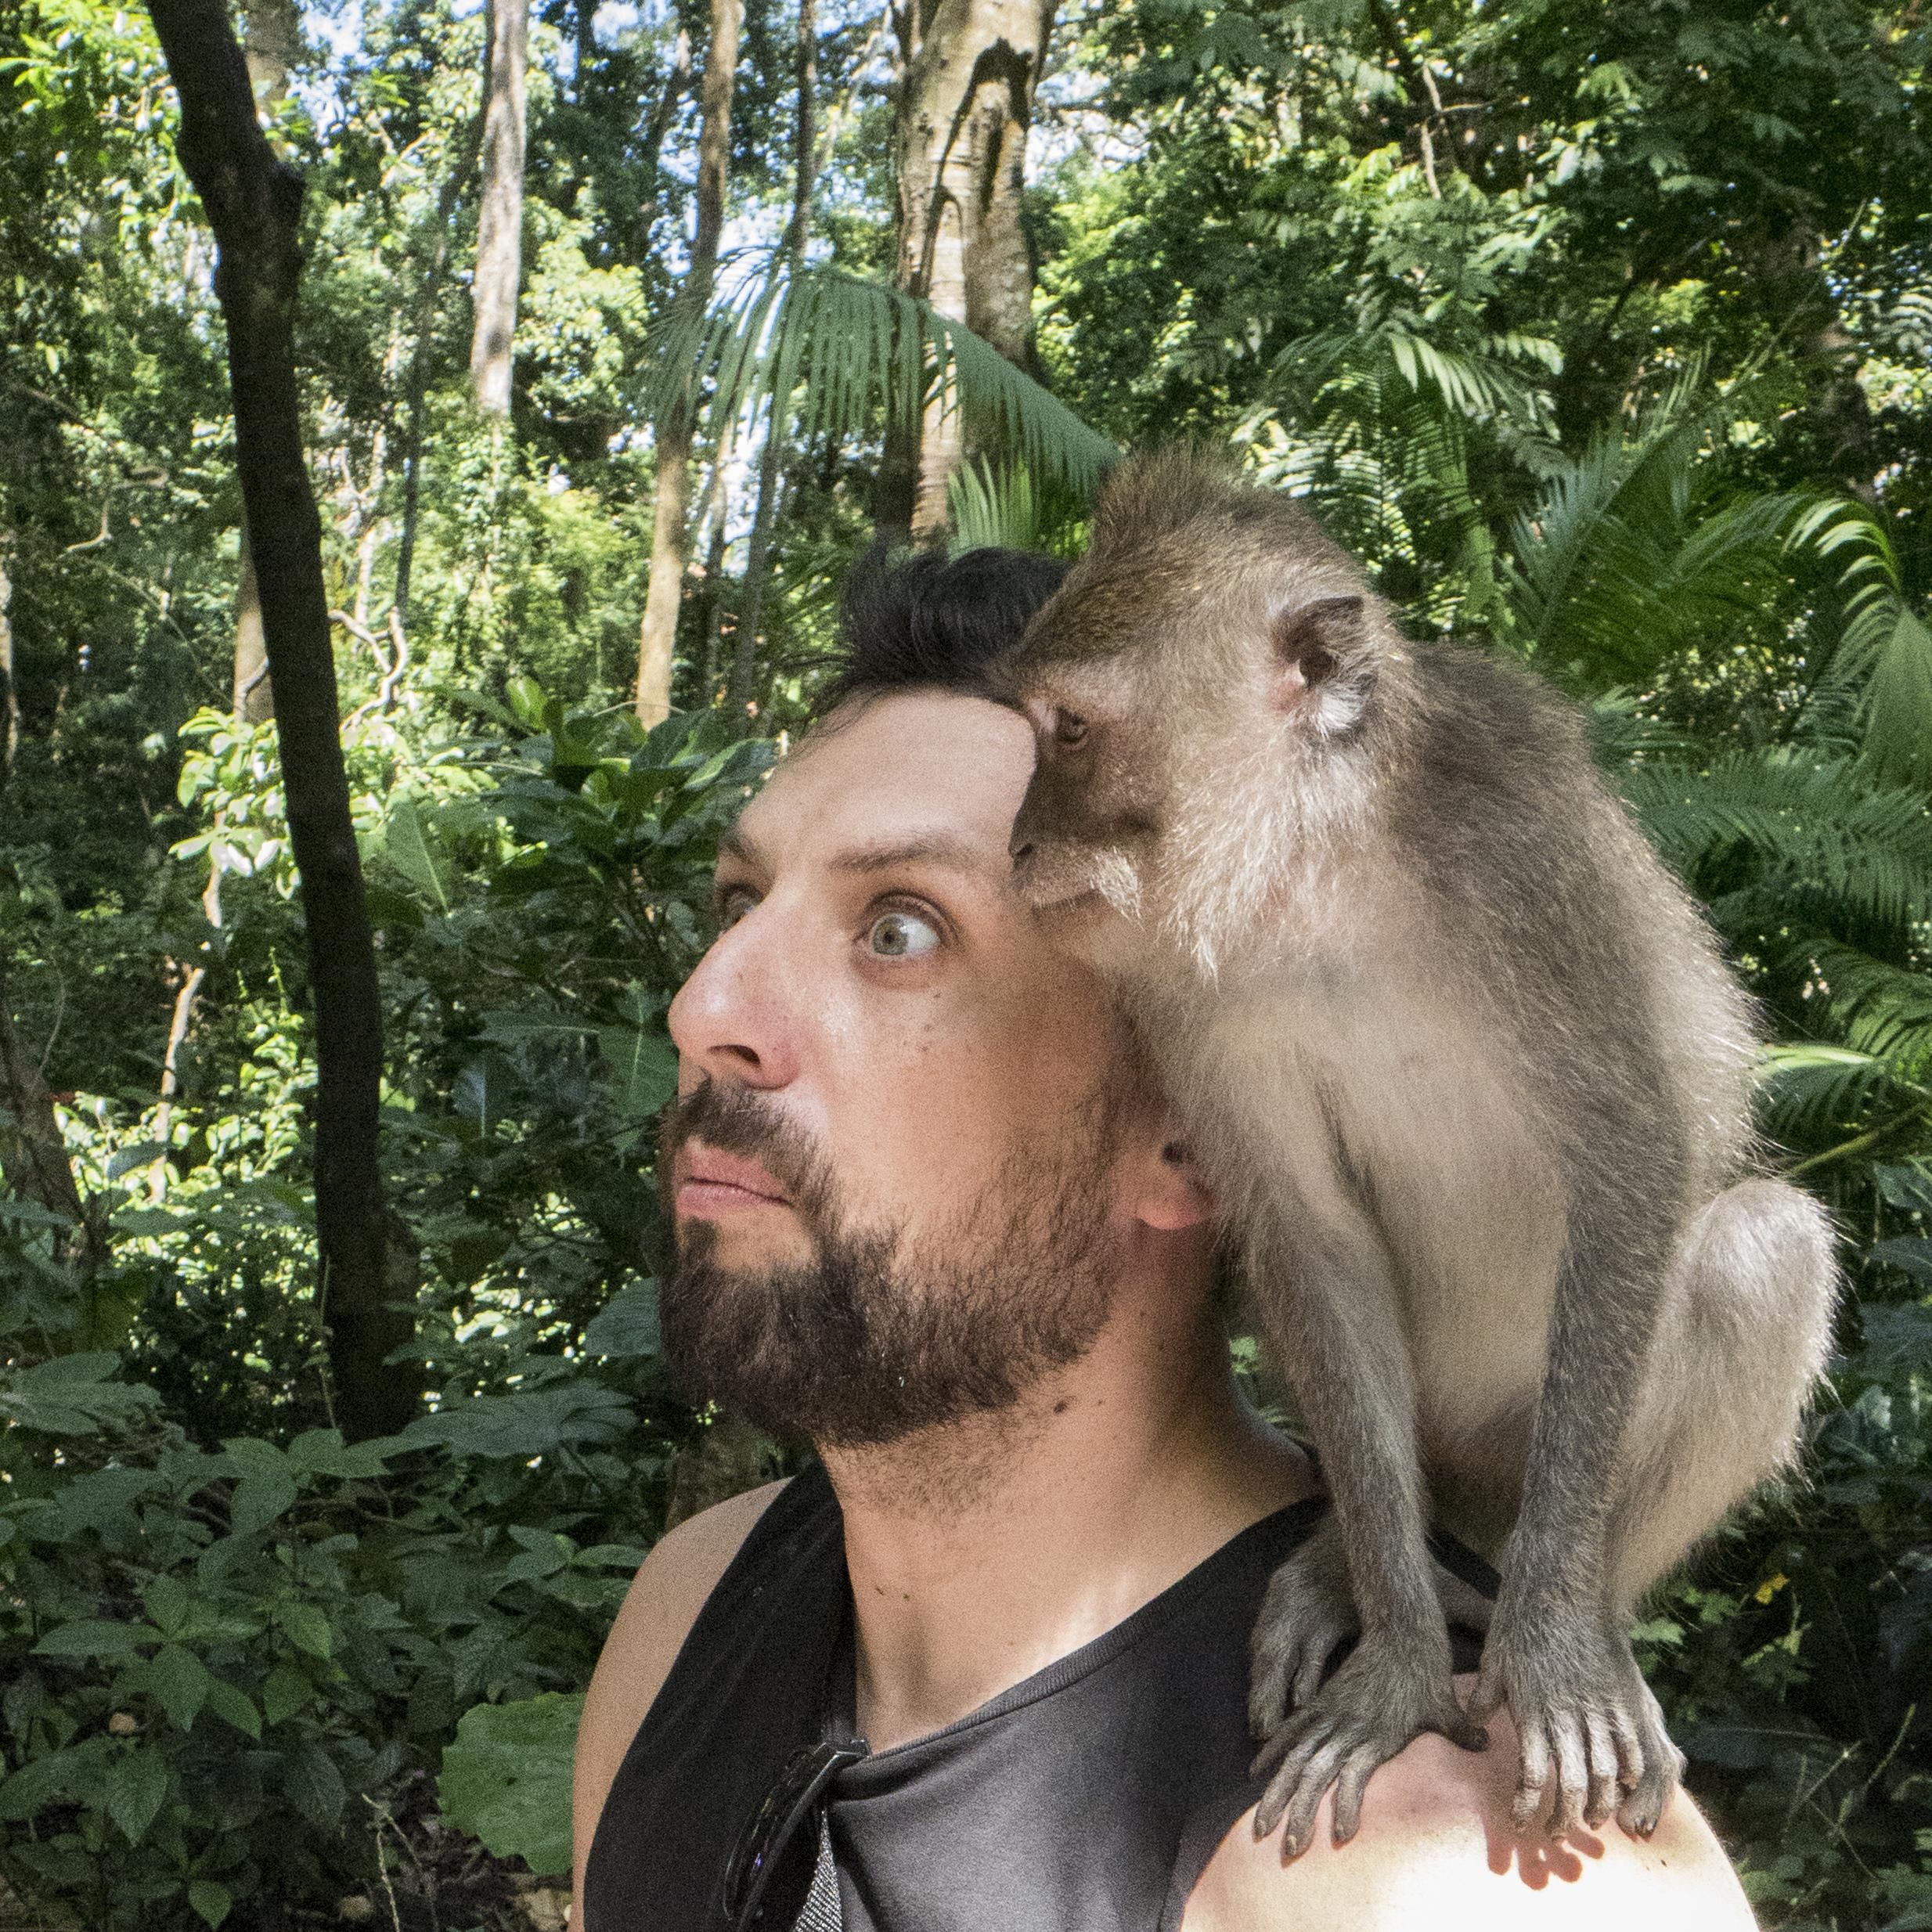 My wife captured the exact moment when this monkey started to pee on me.